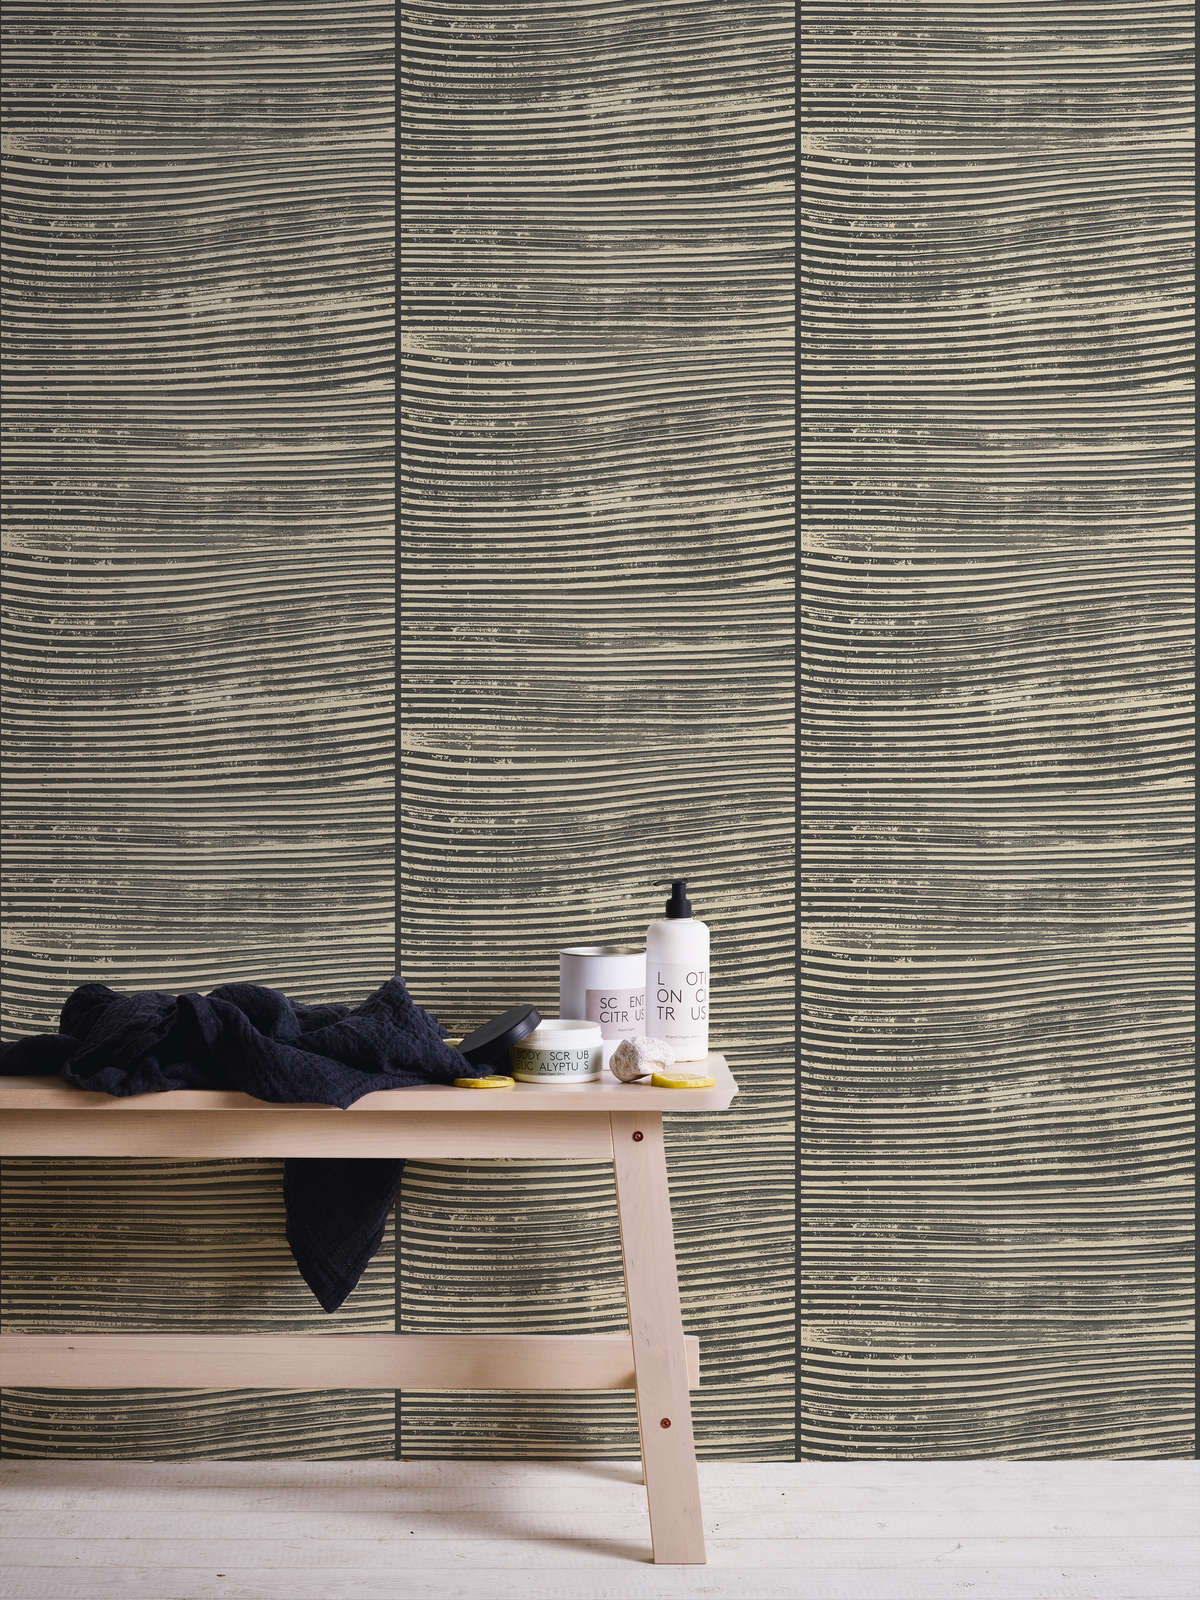             Non-woven wallpaper with lightly textured spatula look - black, beige
        